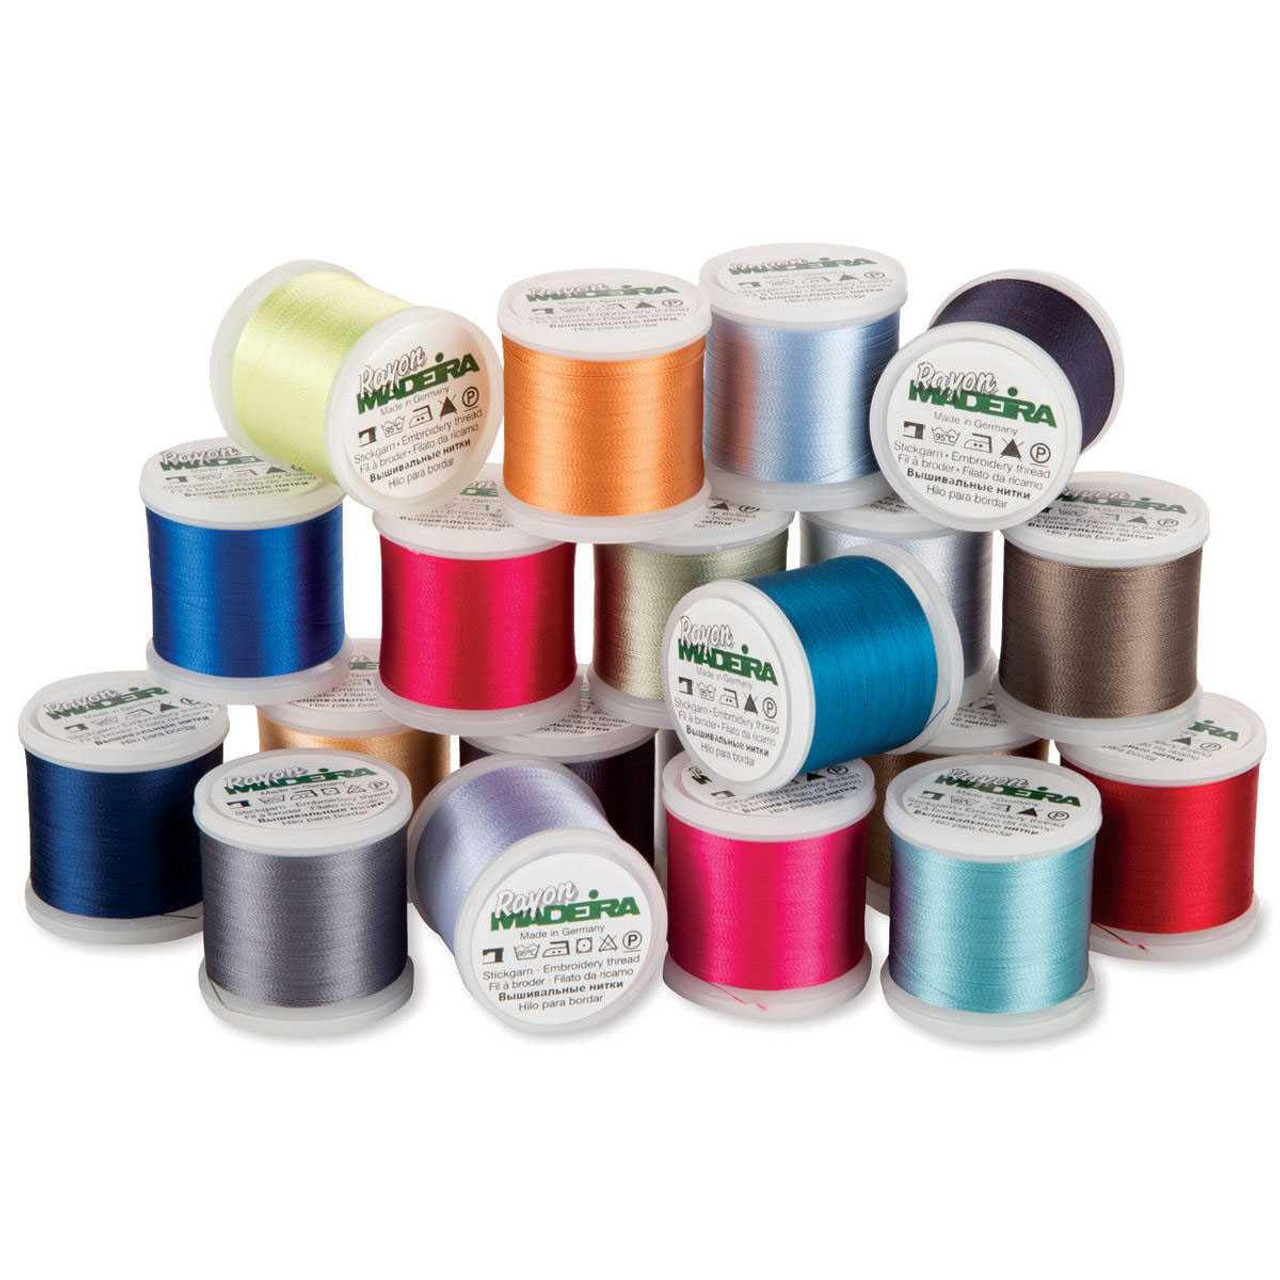 Madeira #40 Weight Polyneon Thread Kit - 16 Pack, 1100yd